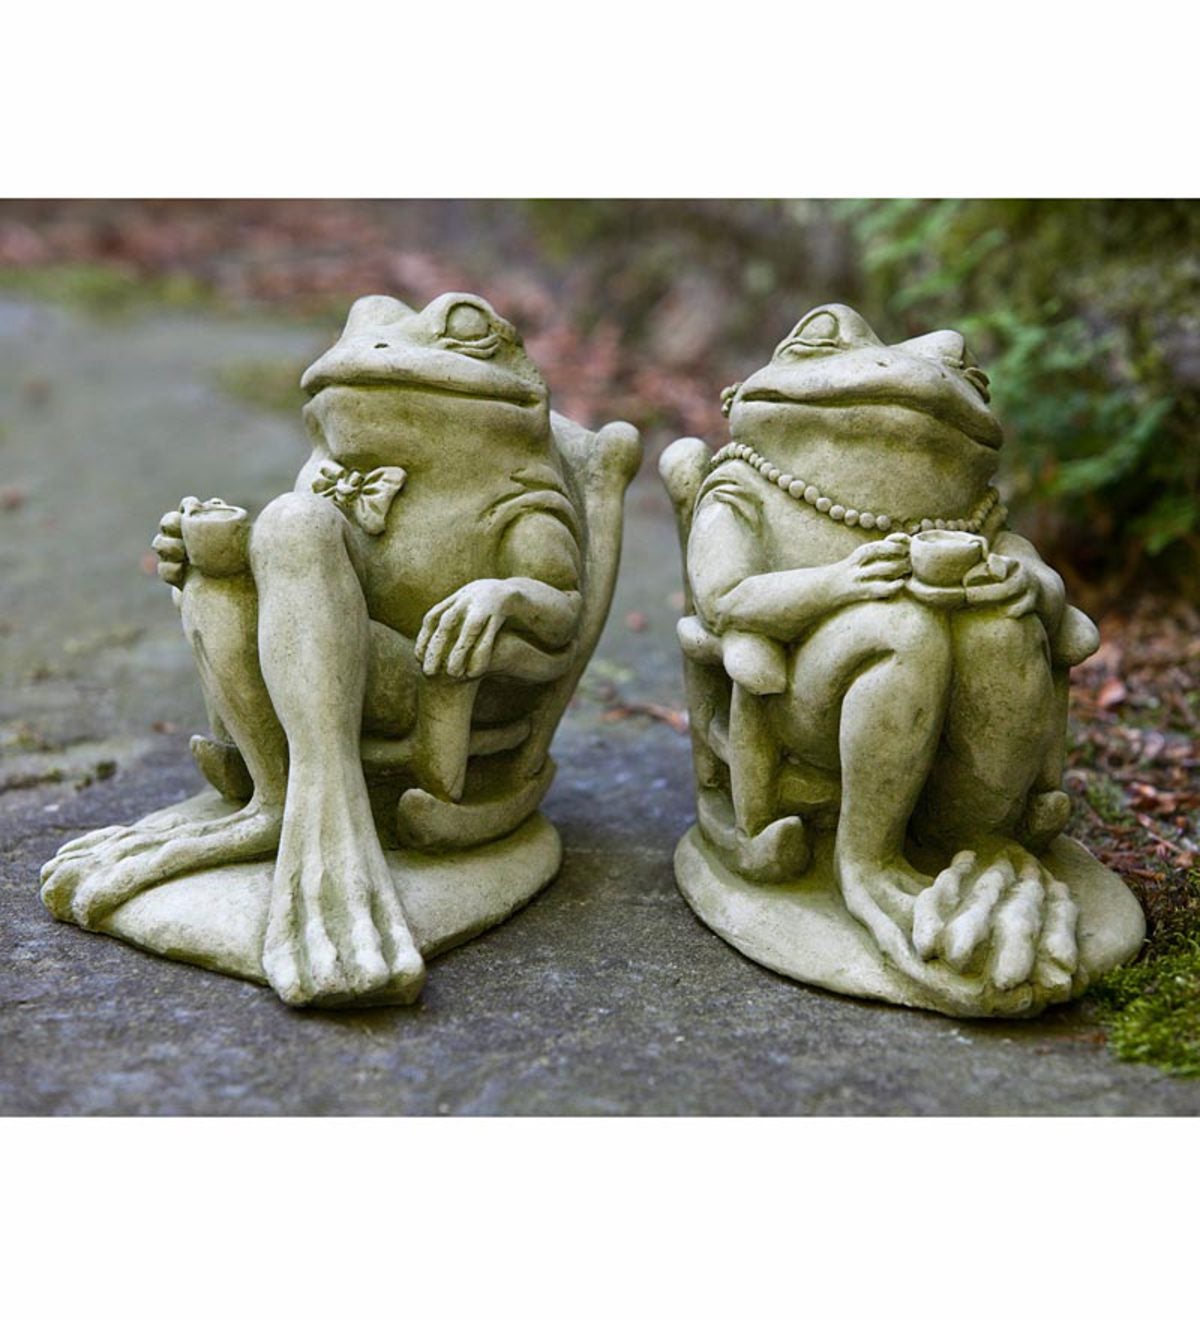 USA-Made Cast Stone Coffee and Tea Frog Garden Statues